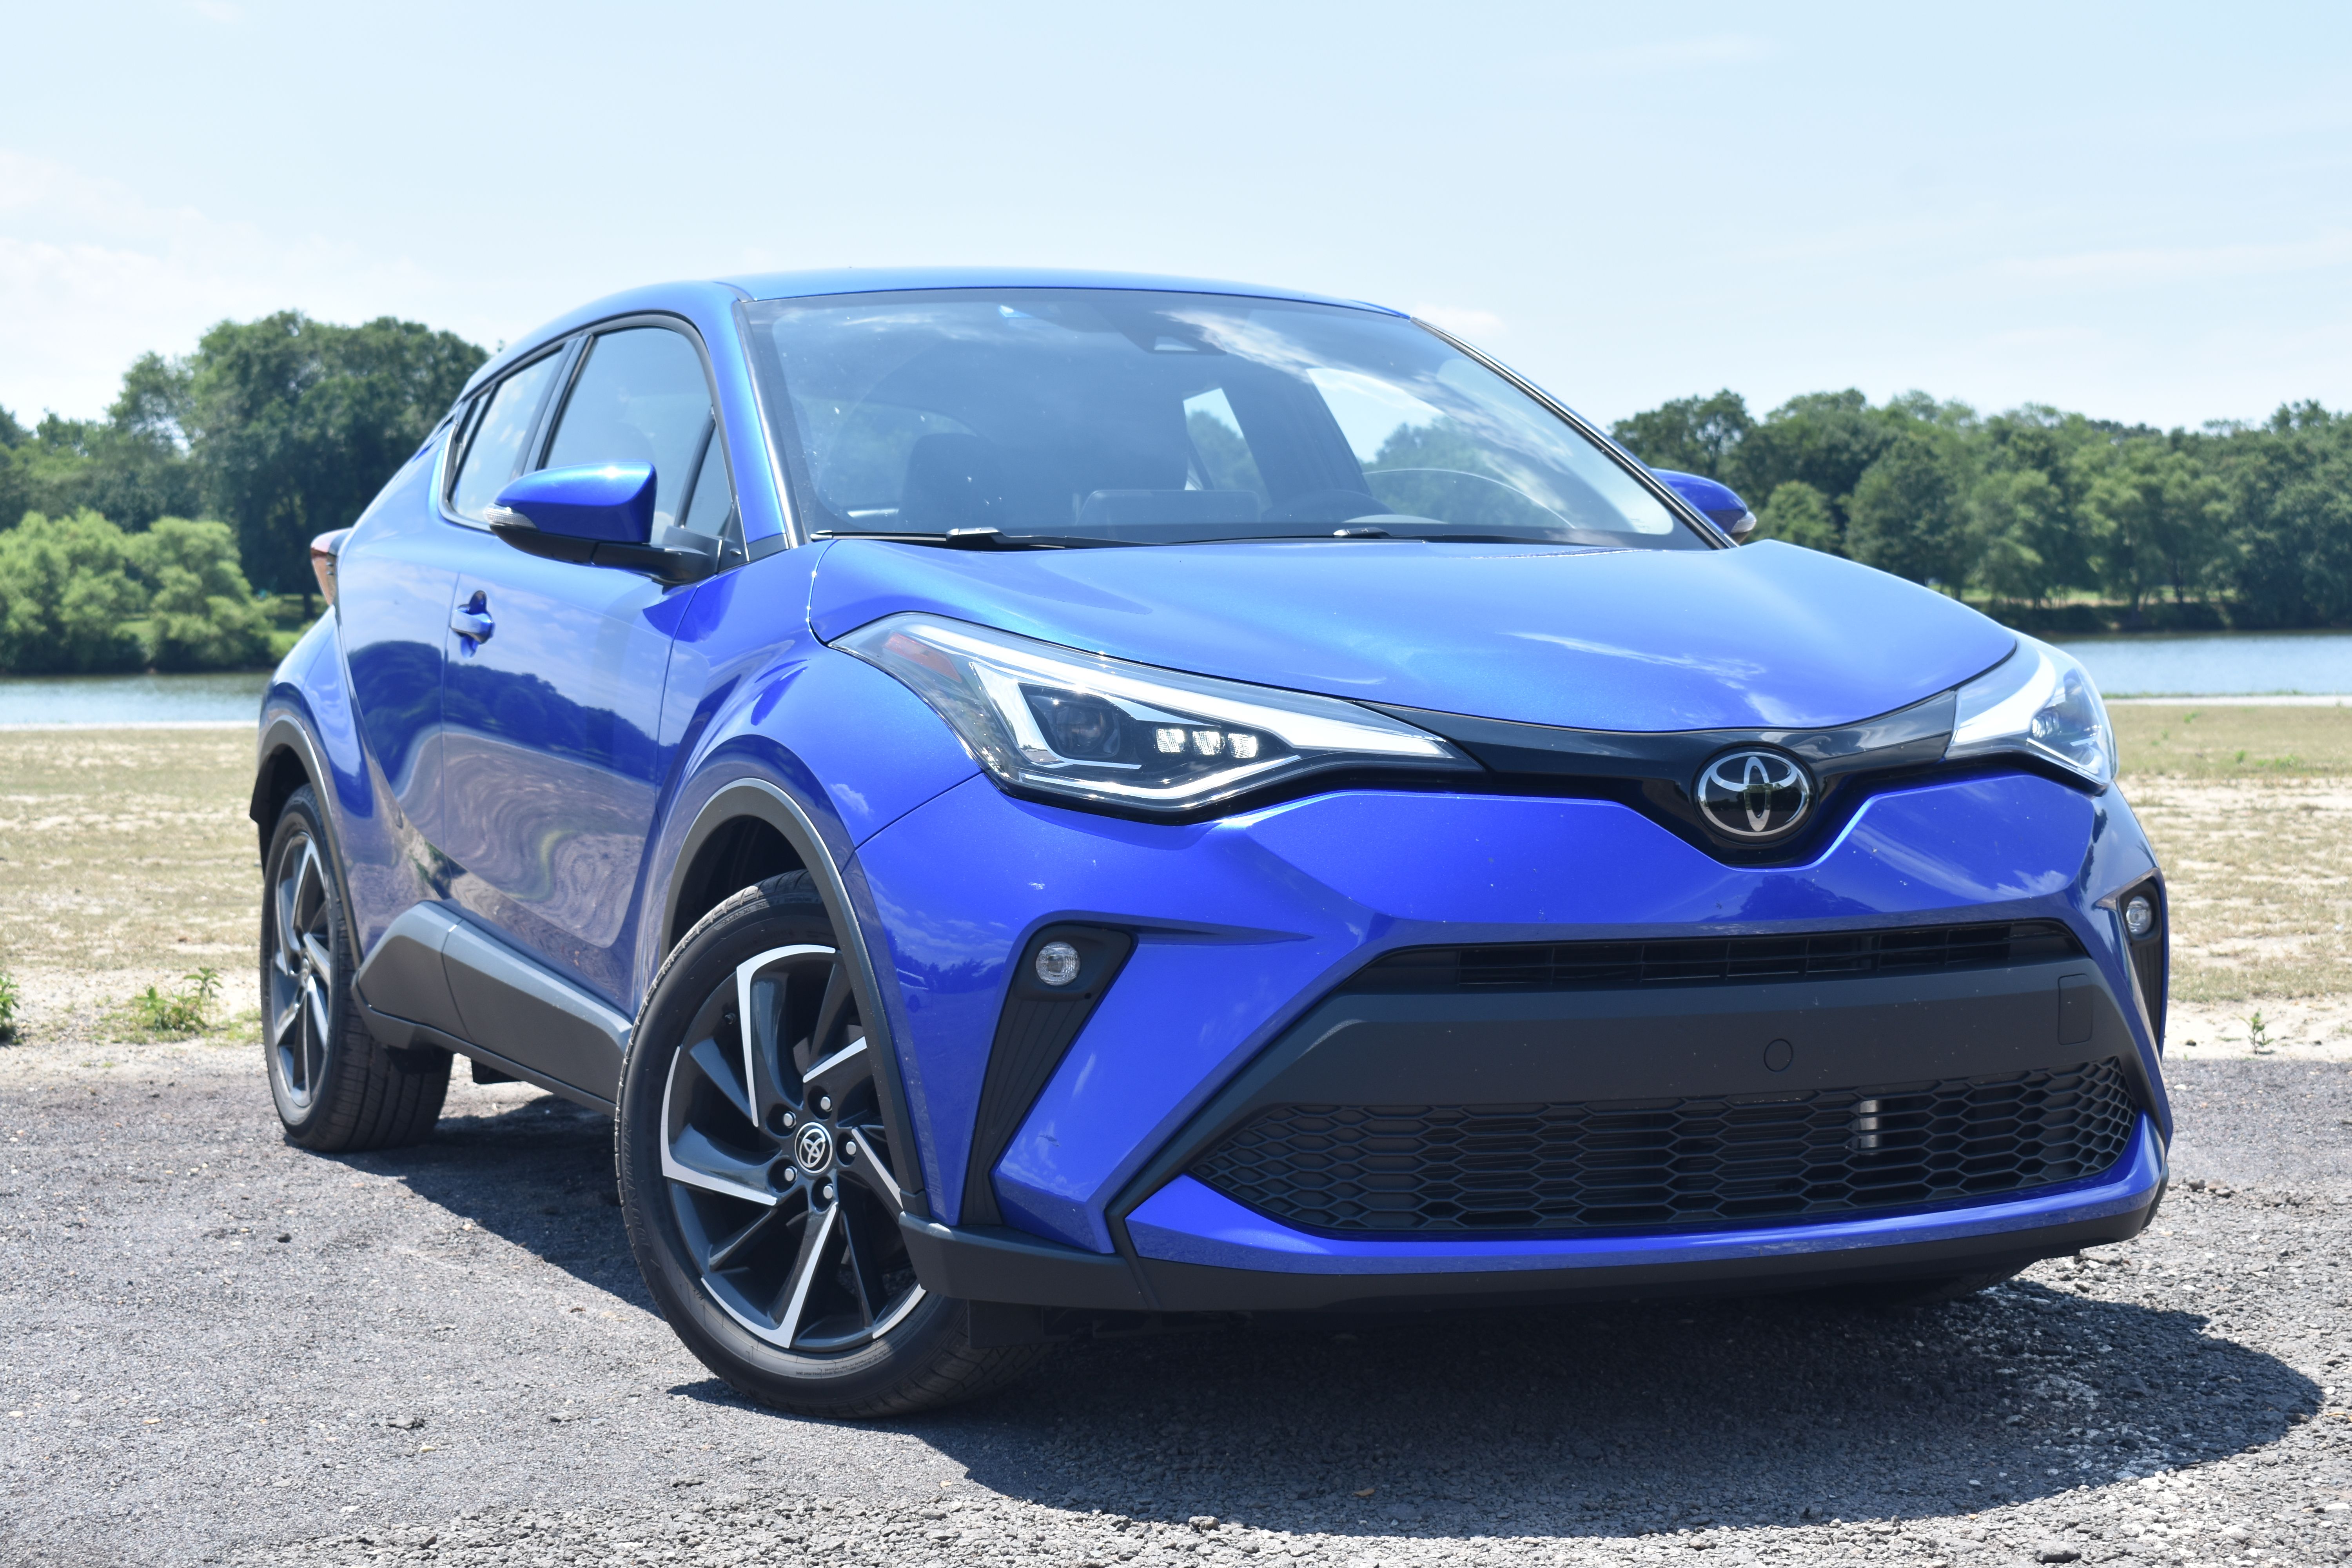 2022 Toyota C-HR Review: A Fairly Desirable Crossover At An